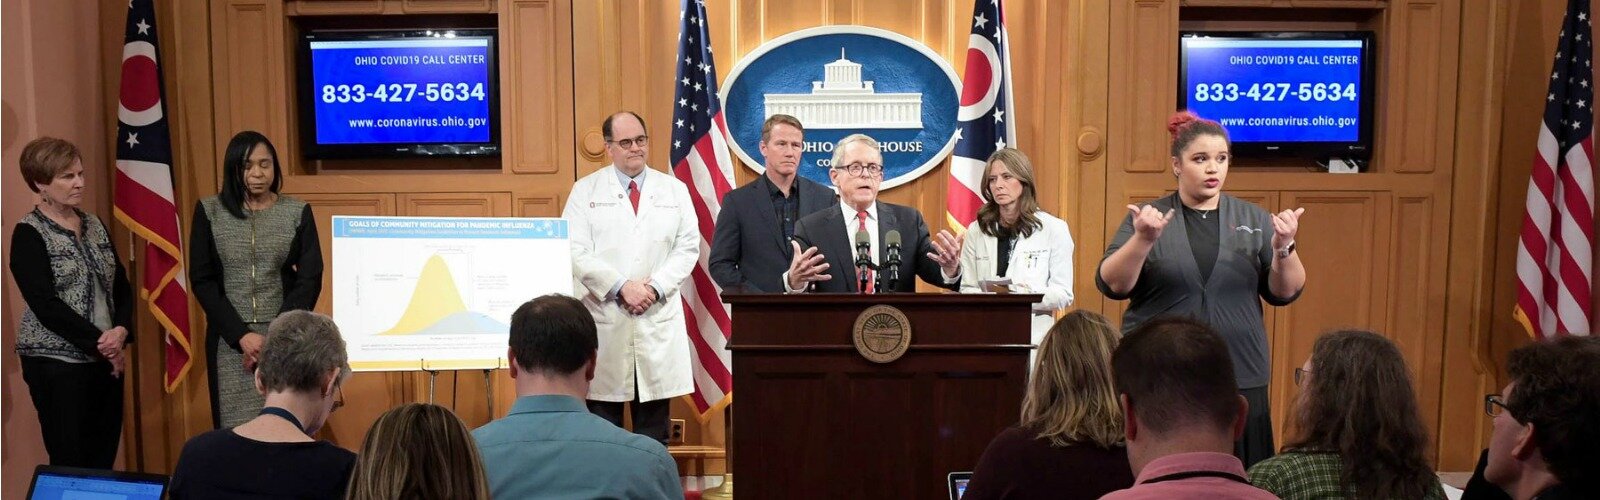 Governor Mike DeWine and his team of first responders speak about the first cases of COVID-19 in Ohio.